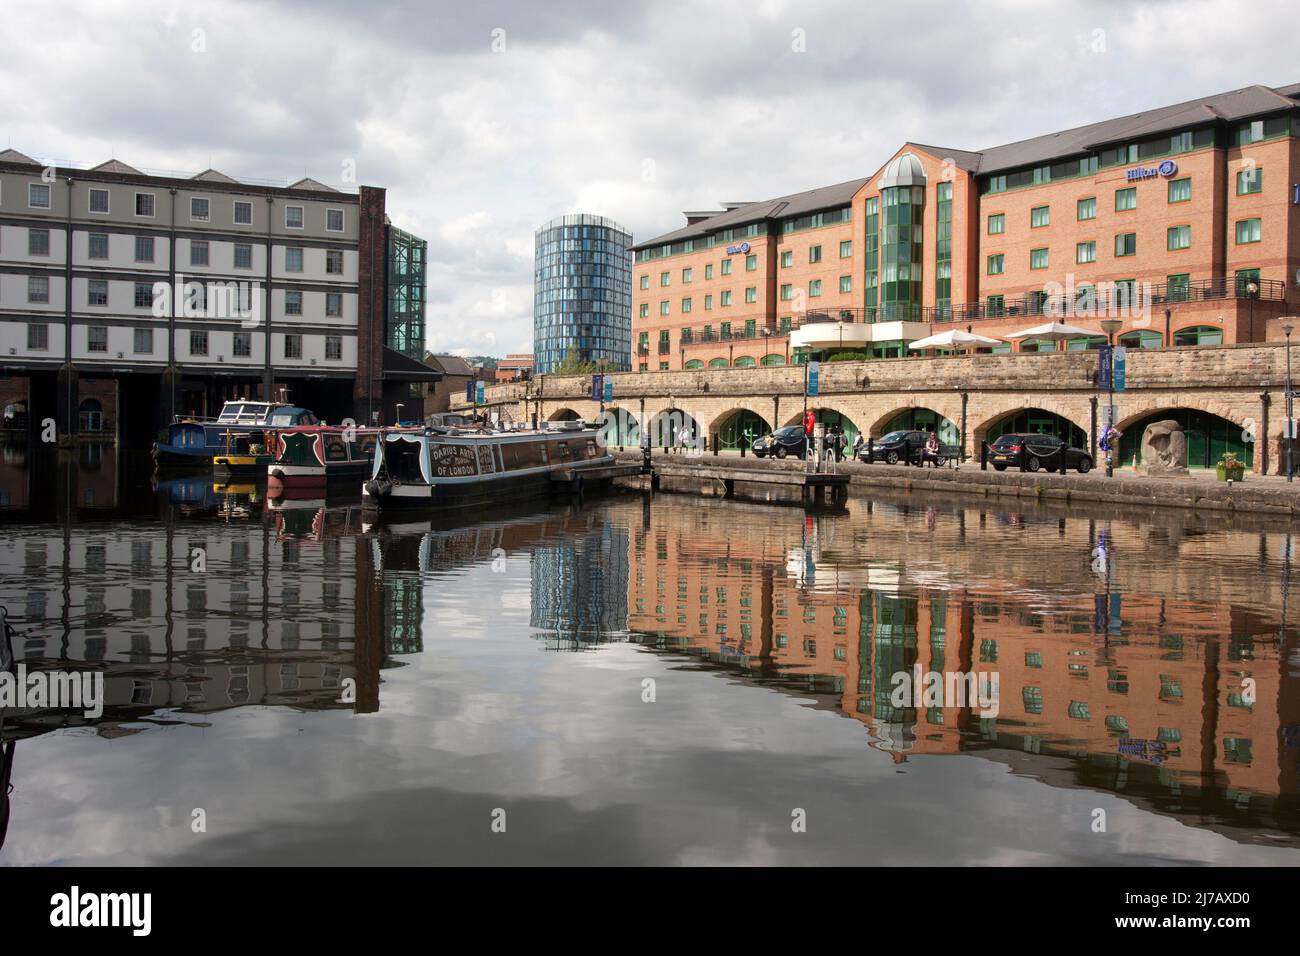 Victoria Quays looking towards the Straddle Warehouse, Sheffield & Tinsley rejuvenated canal basin, Sheffield, South Yorkshire, England Stock Photo